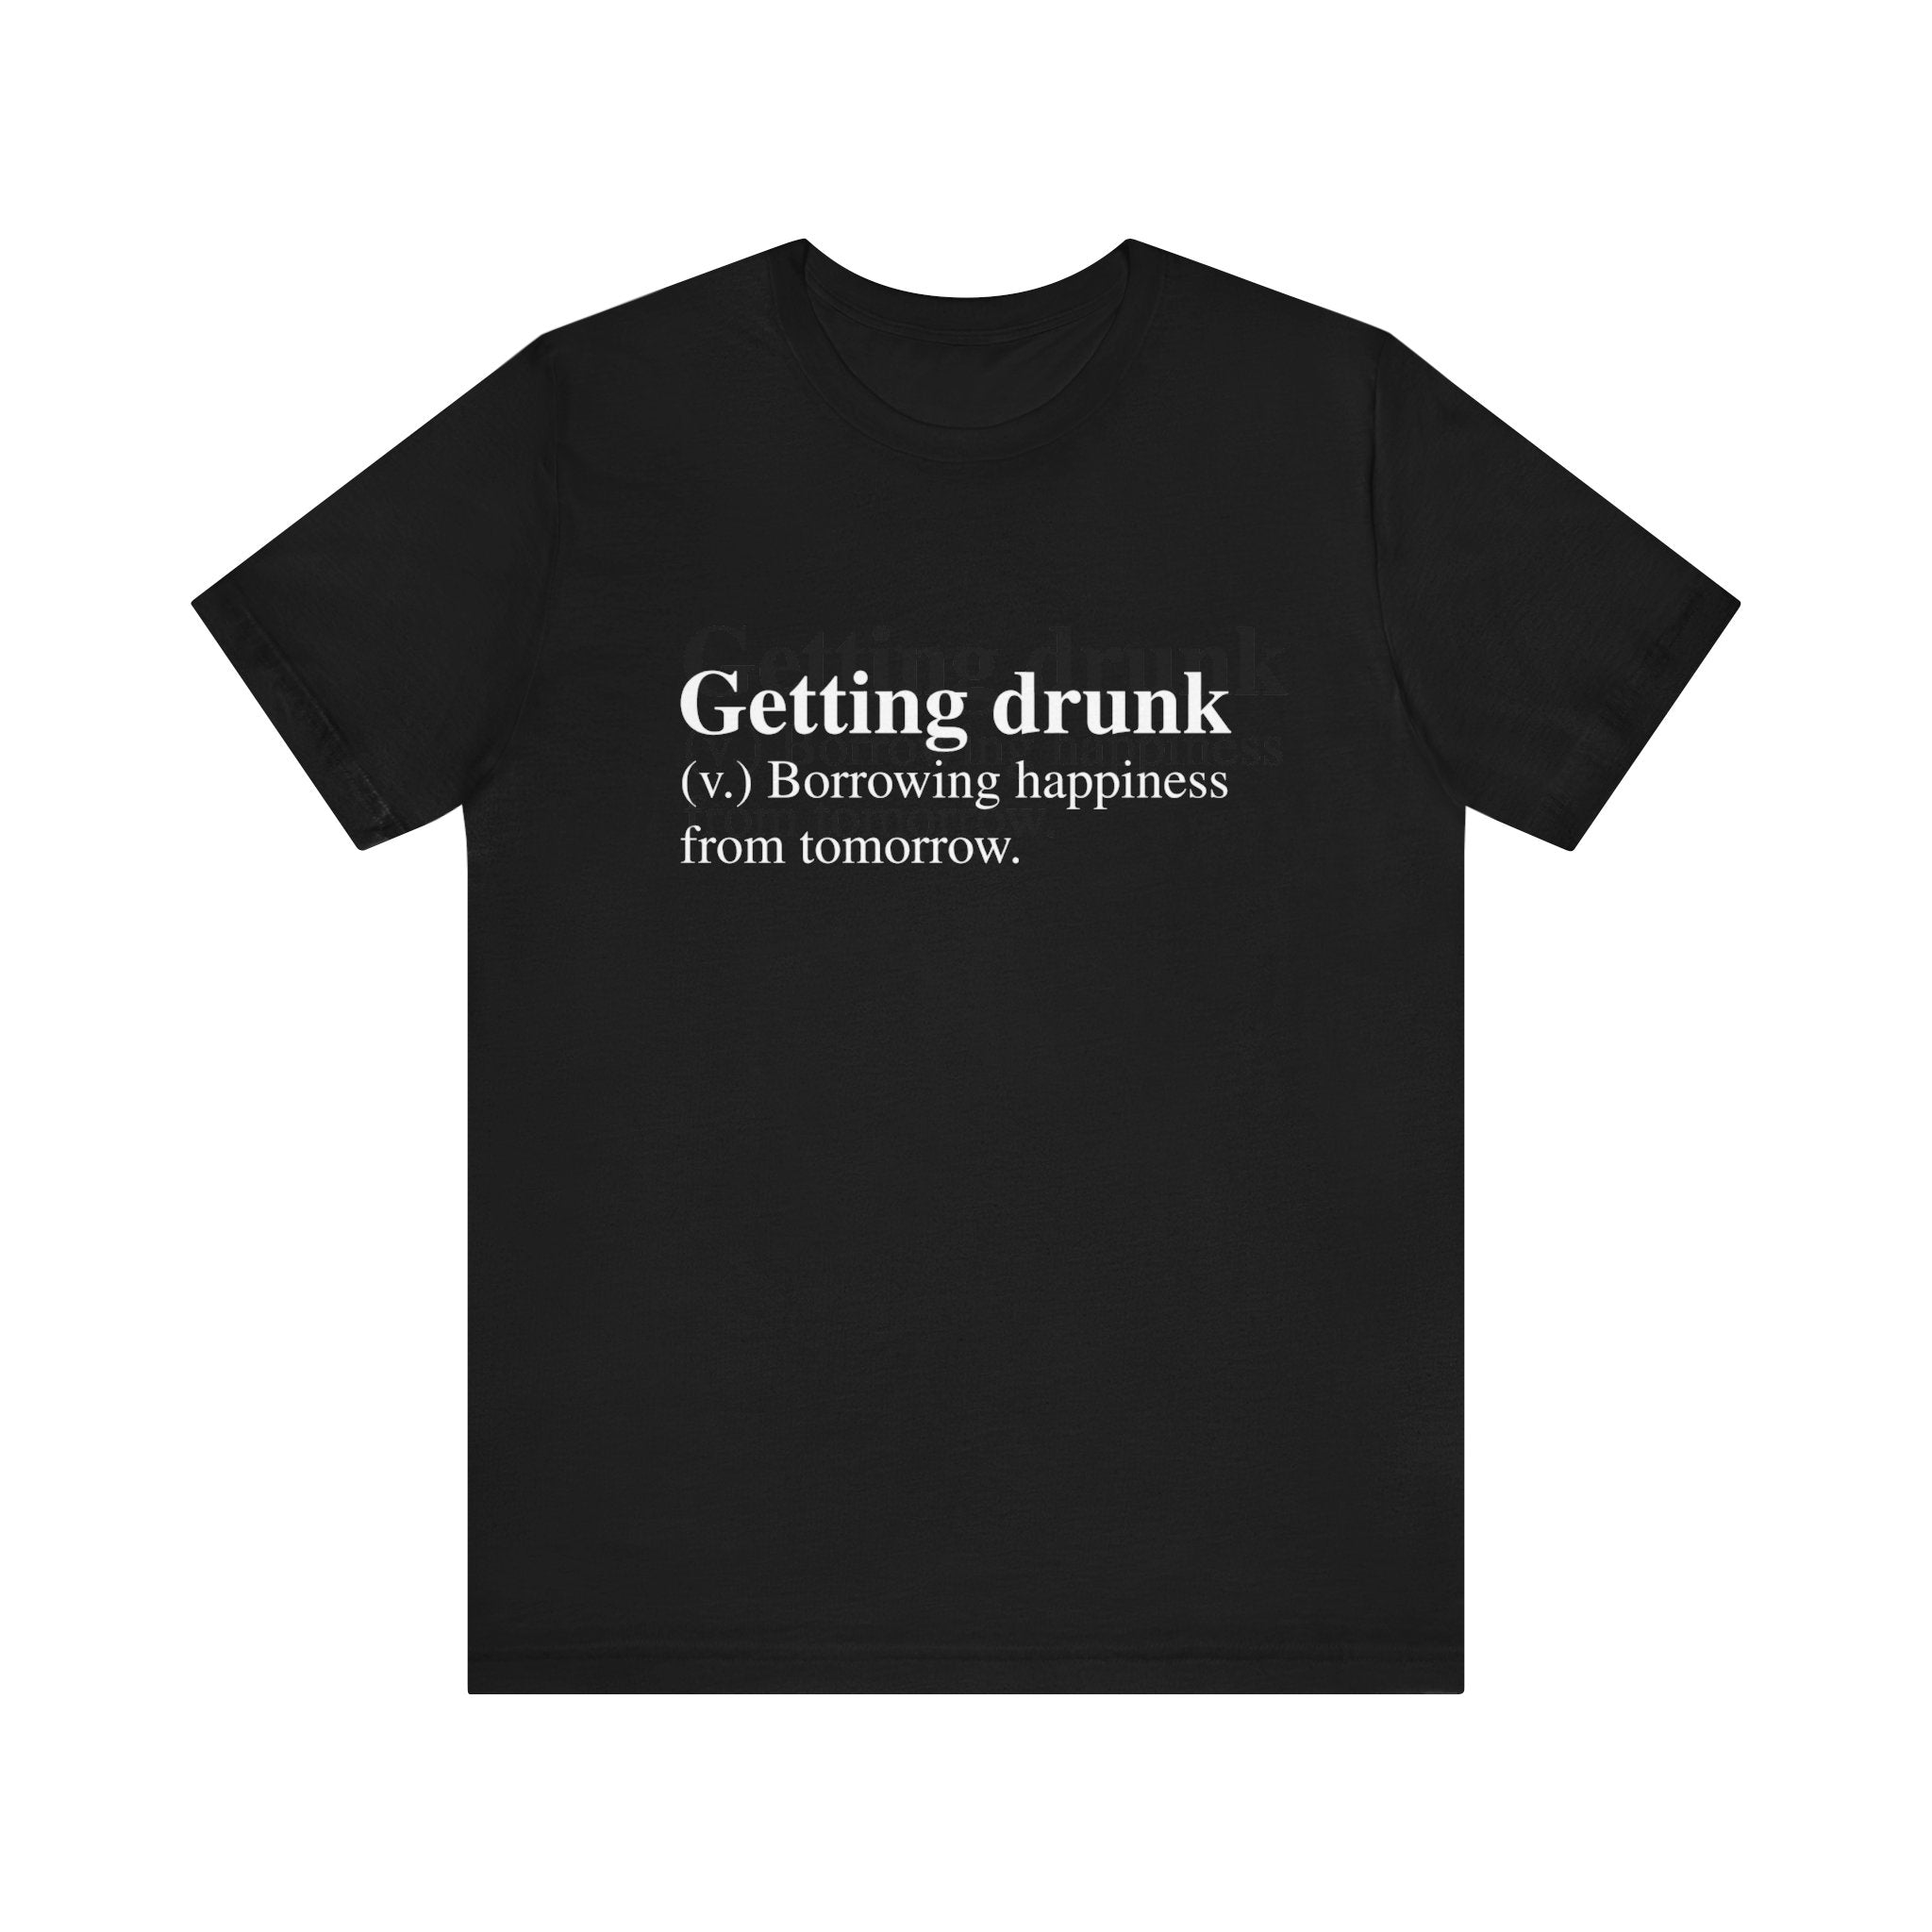 Sentence with product name: Getting Drunk T-shirt made of soft cotton with the text "getting drunk (v.) borrowing happiness from tomorrow" in white font on the front.